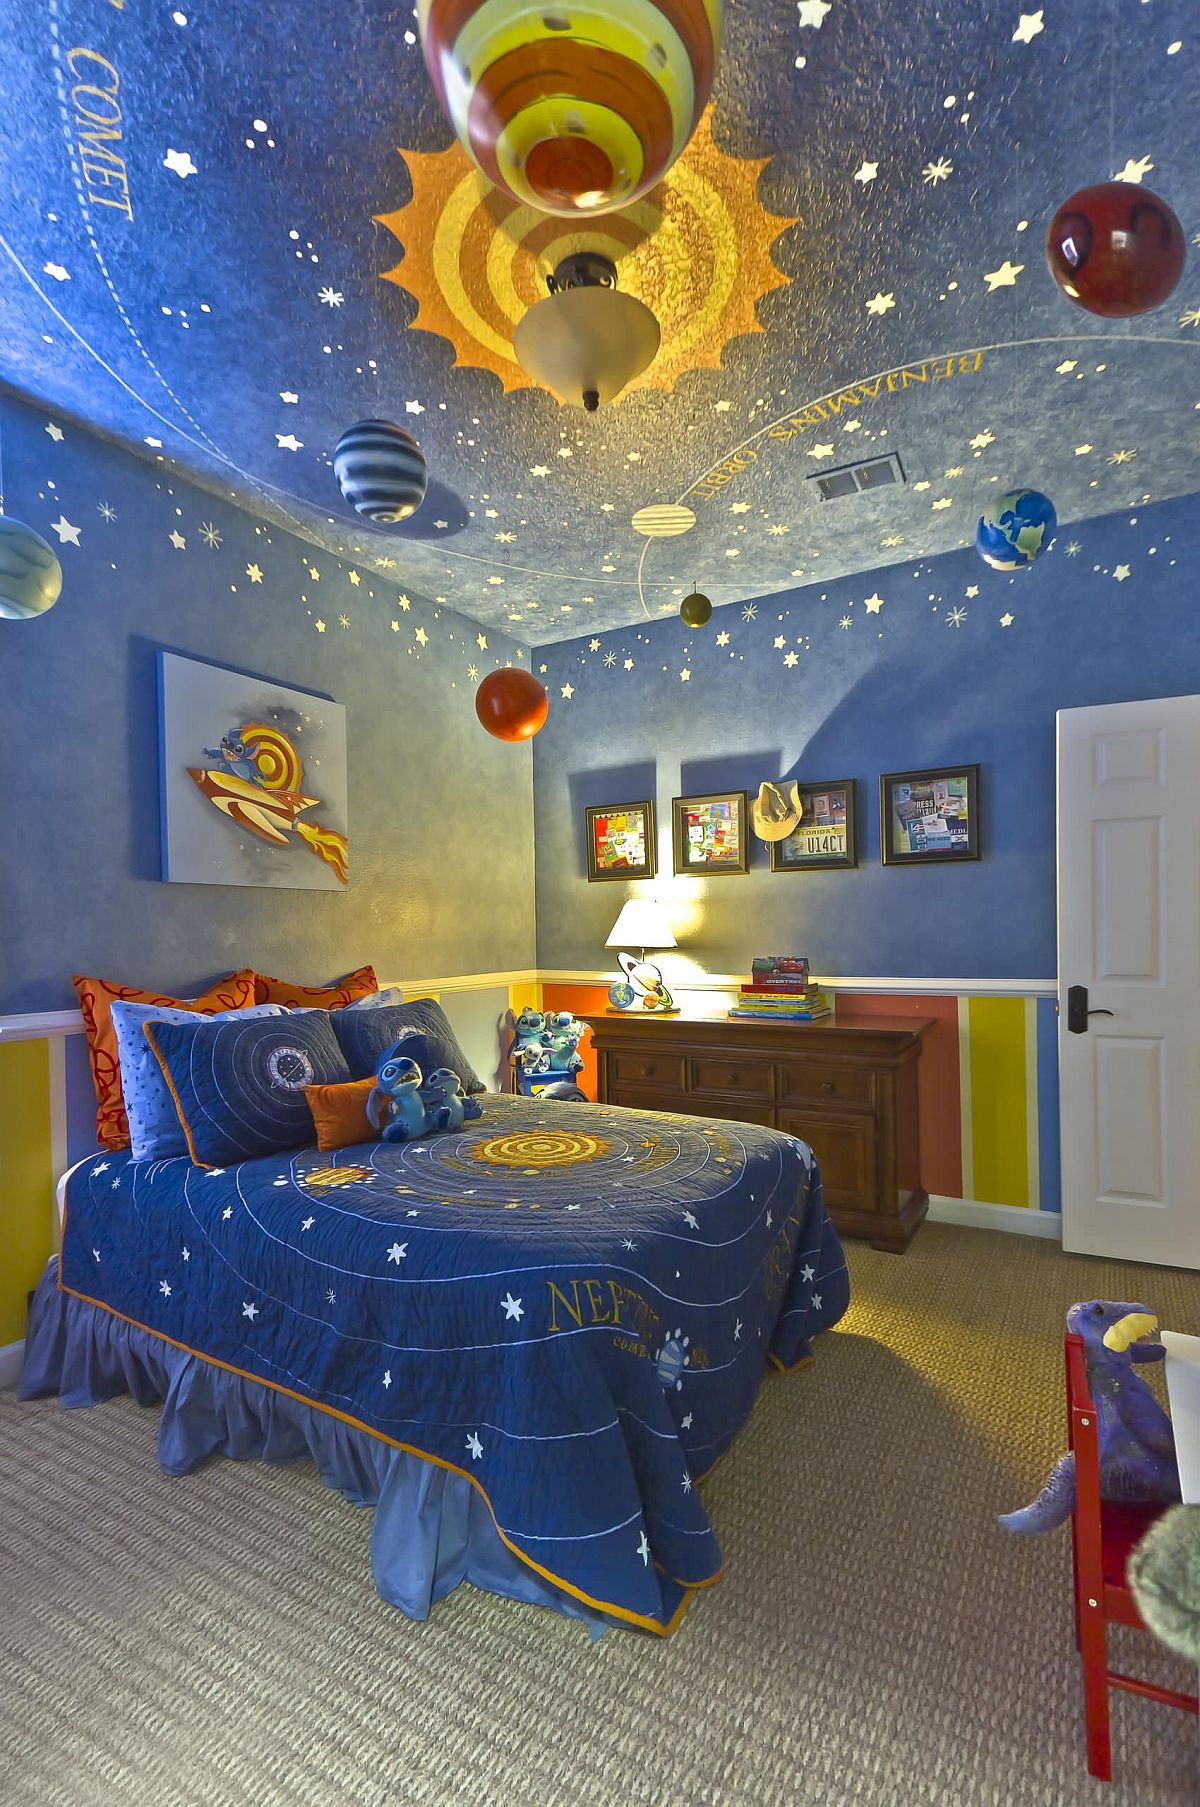 Wallpaper-on-ceilings 10 Cute Ways to Use Removable Wallpaper for Your Kid’s Bedroom